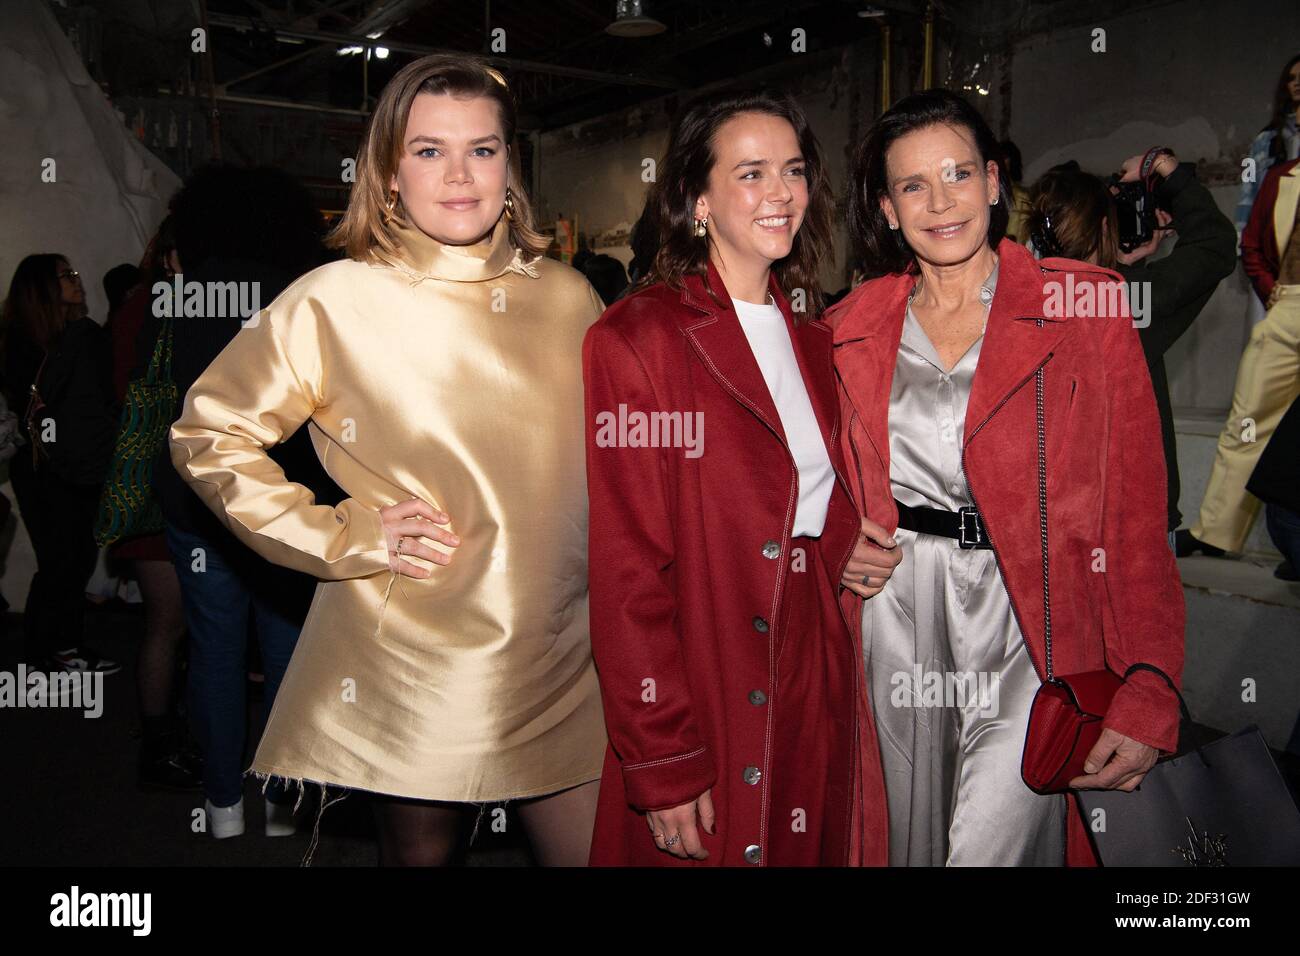 princess-stephanie-of-monaco-and-her-daughters-designer-pauline-ducruet-and-camille-gottlieb-attend-the-alter-show-as-part-of-the-paris-fashion-week-womenswear-fallwinter-20202021-on-february-26-2020-in-paris-france-photo-by-david-niviereabacapresscom-2DF31GW.jpg